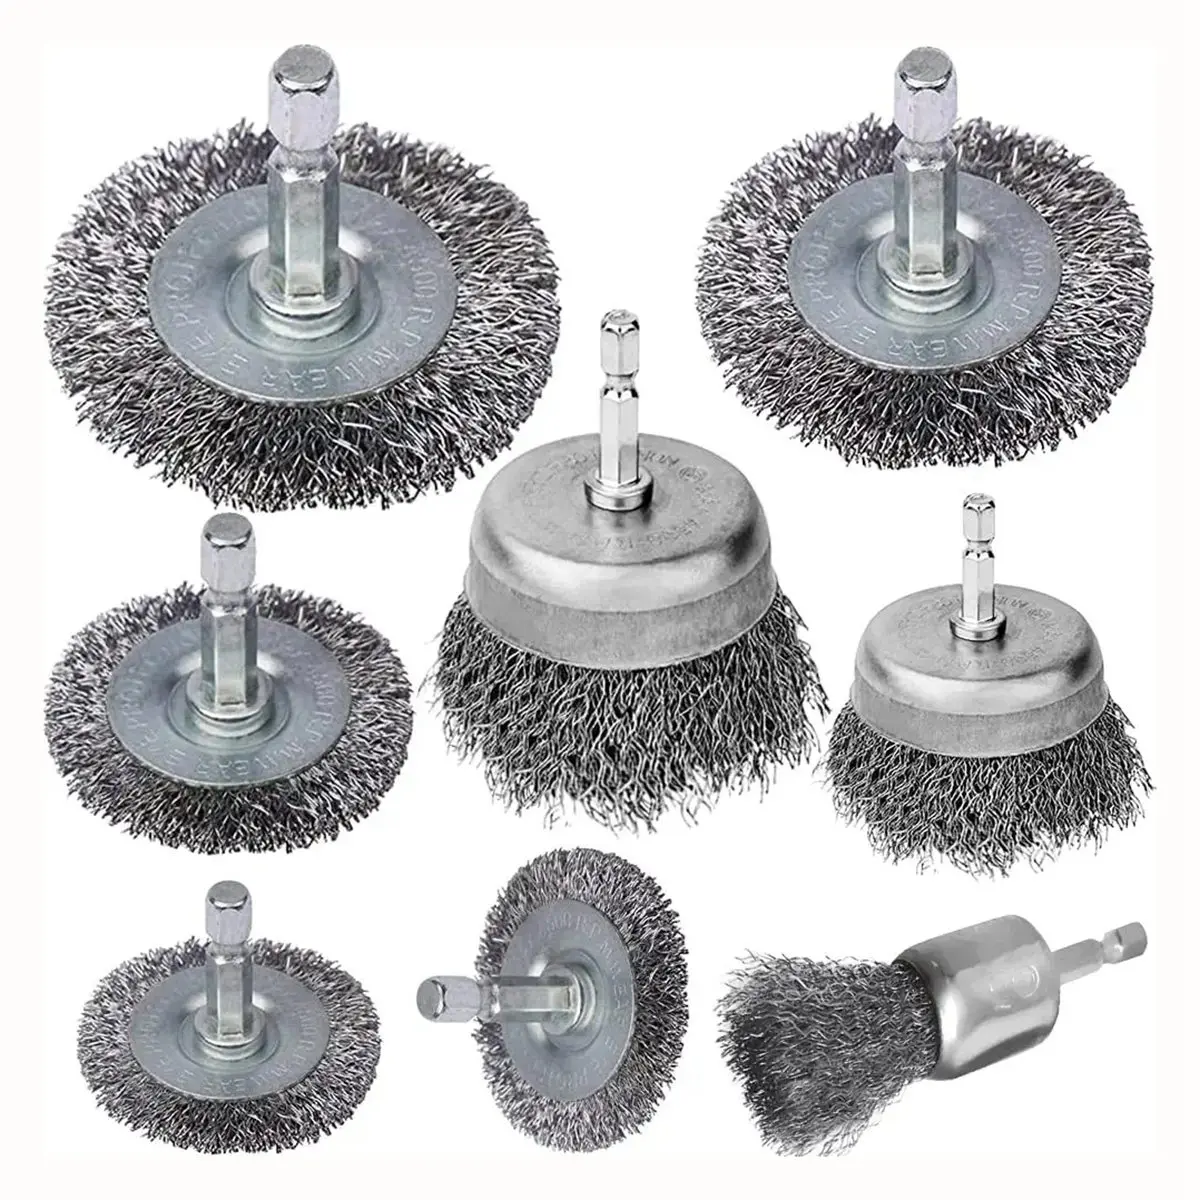 

8 Piece Wire Brush Wheel Cup Brush Set 1/4Inch Hex Shank Coarse Crimped Carbon Steel Wire Wheel for Rust Removal